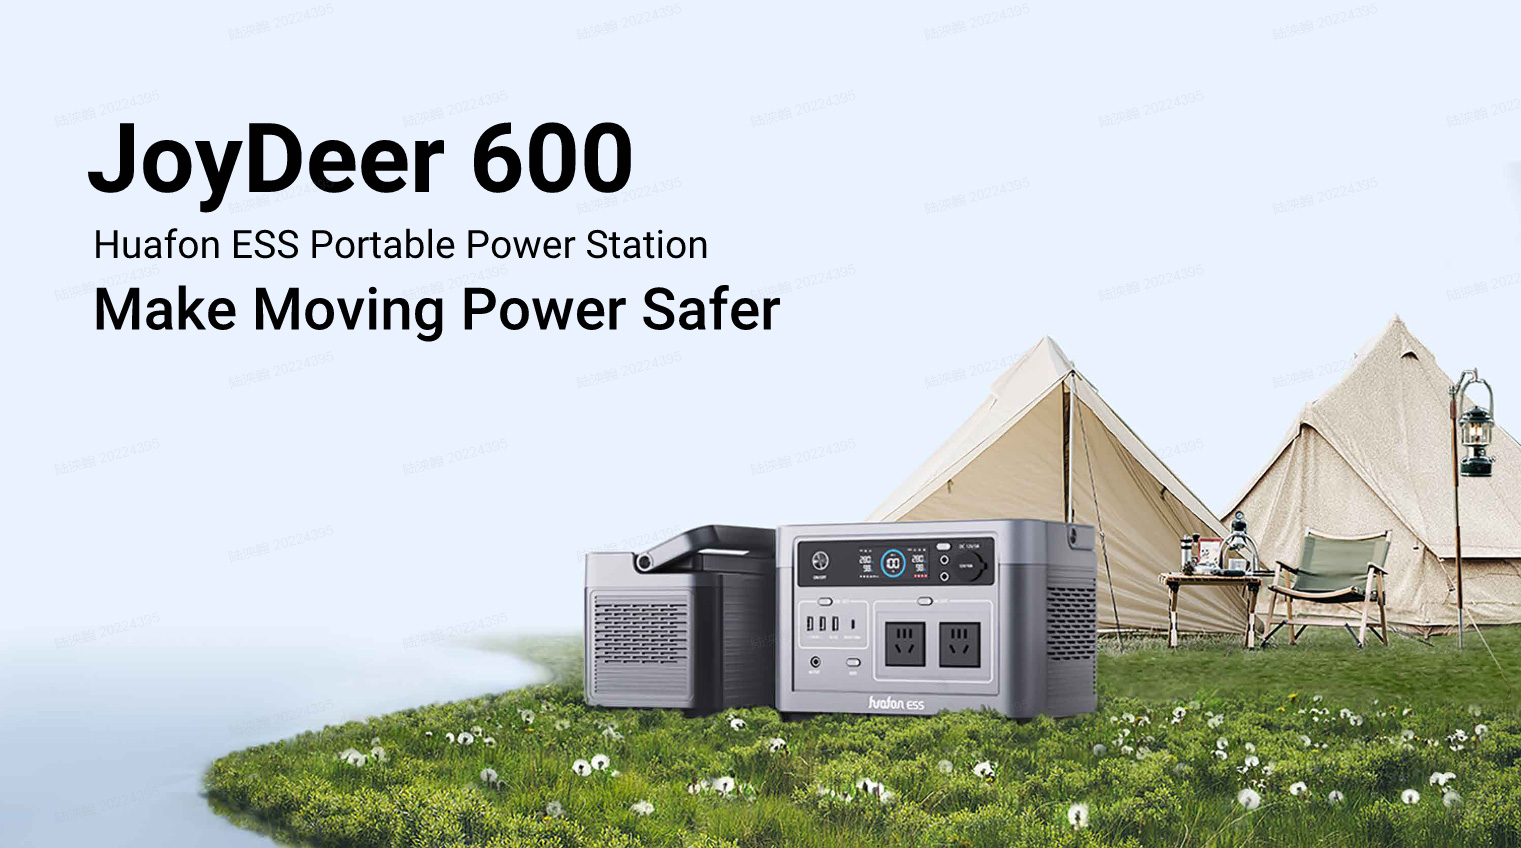 Huafon Energy Storage Outdoor Portable Mobile Power Supply | Charging Your Life Anytime, Anywhere